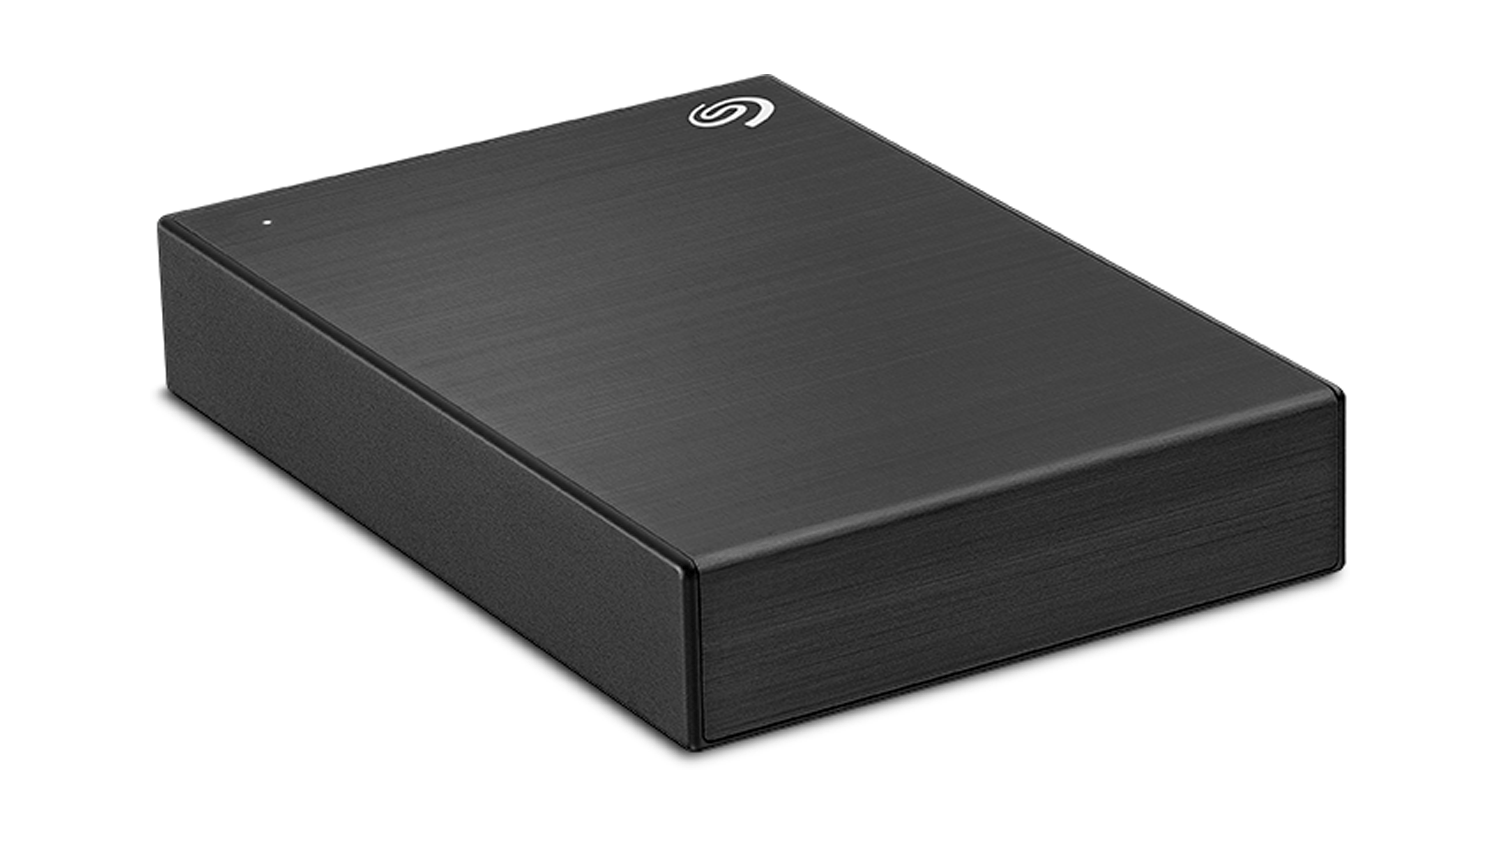 Seagate One Touch Portable 5TB Hard Drive with Rescue Data Recovery - Black